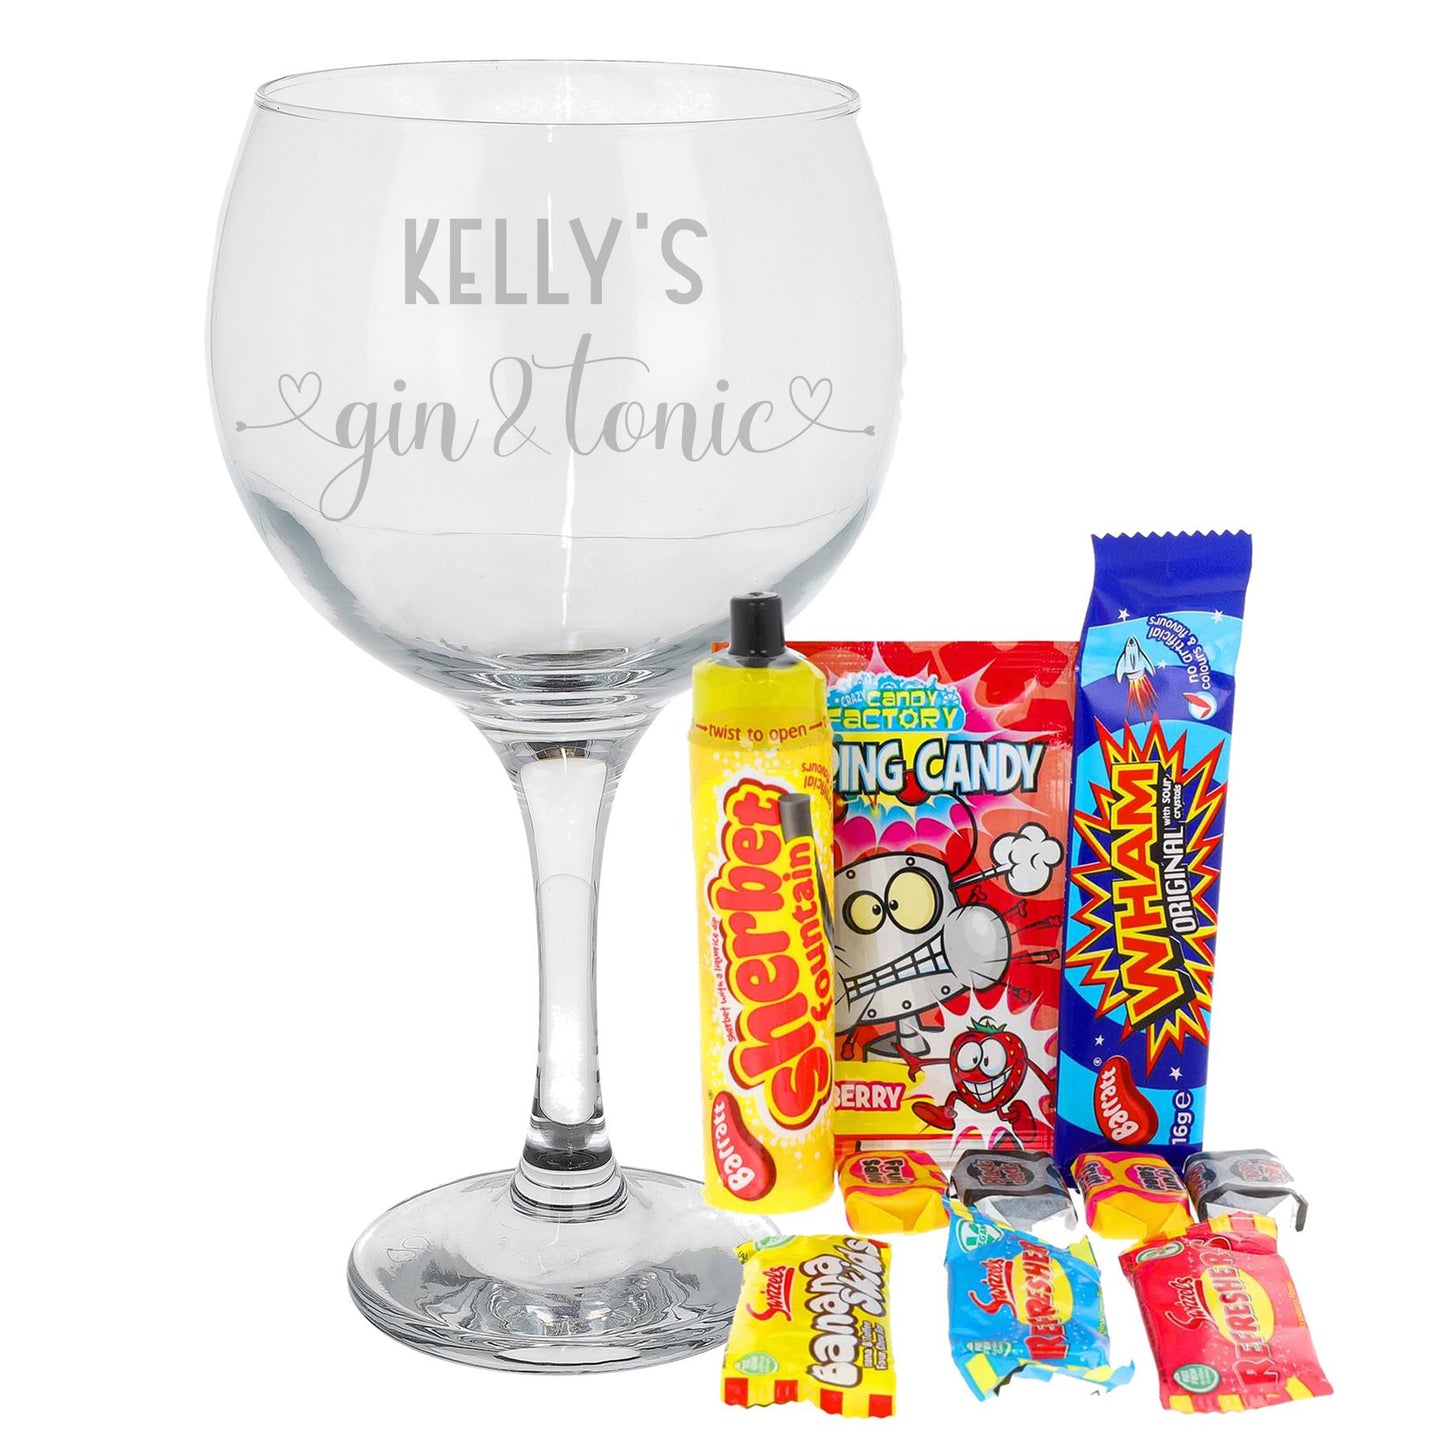 Engraved Personalised Gin Glass | Gin & Tonic Glass with Name  - Always Looking Good - Retro Sweets Filled  